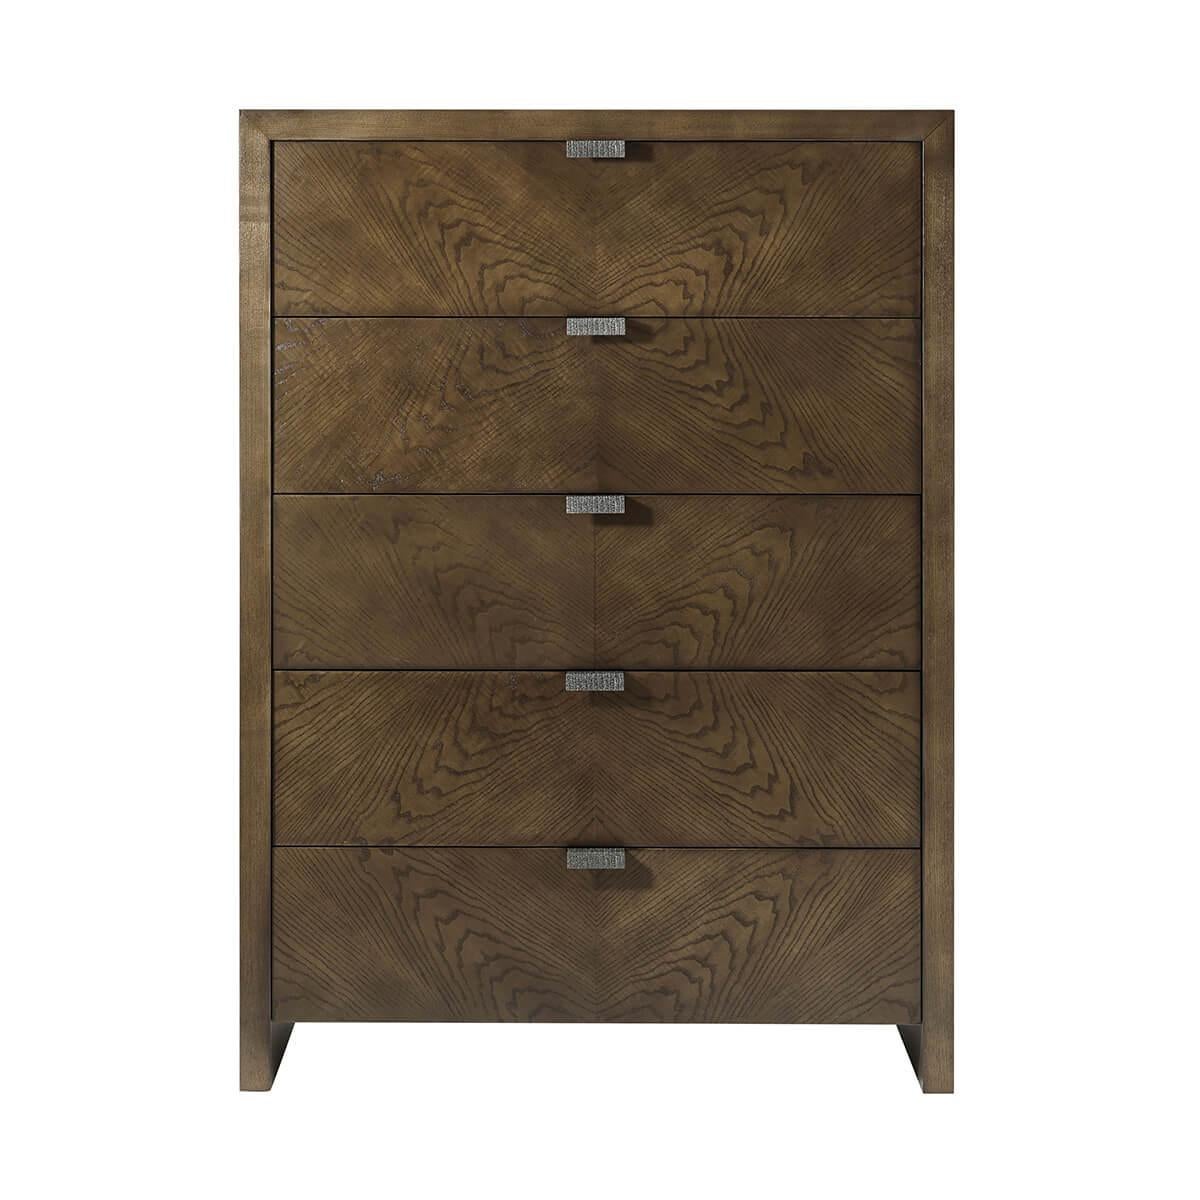 A handsome five-drawer tall bedroom chest made of figured ash in dark Earth finish with textured metal pulls in our Ember finish and soft close drawers.

Dimensions: 40